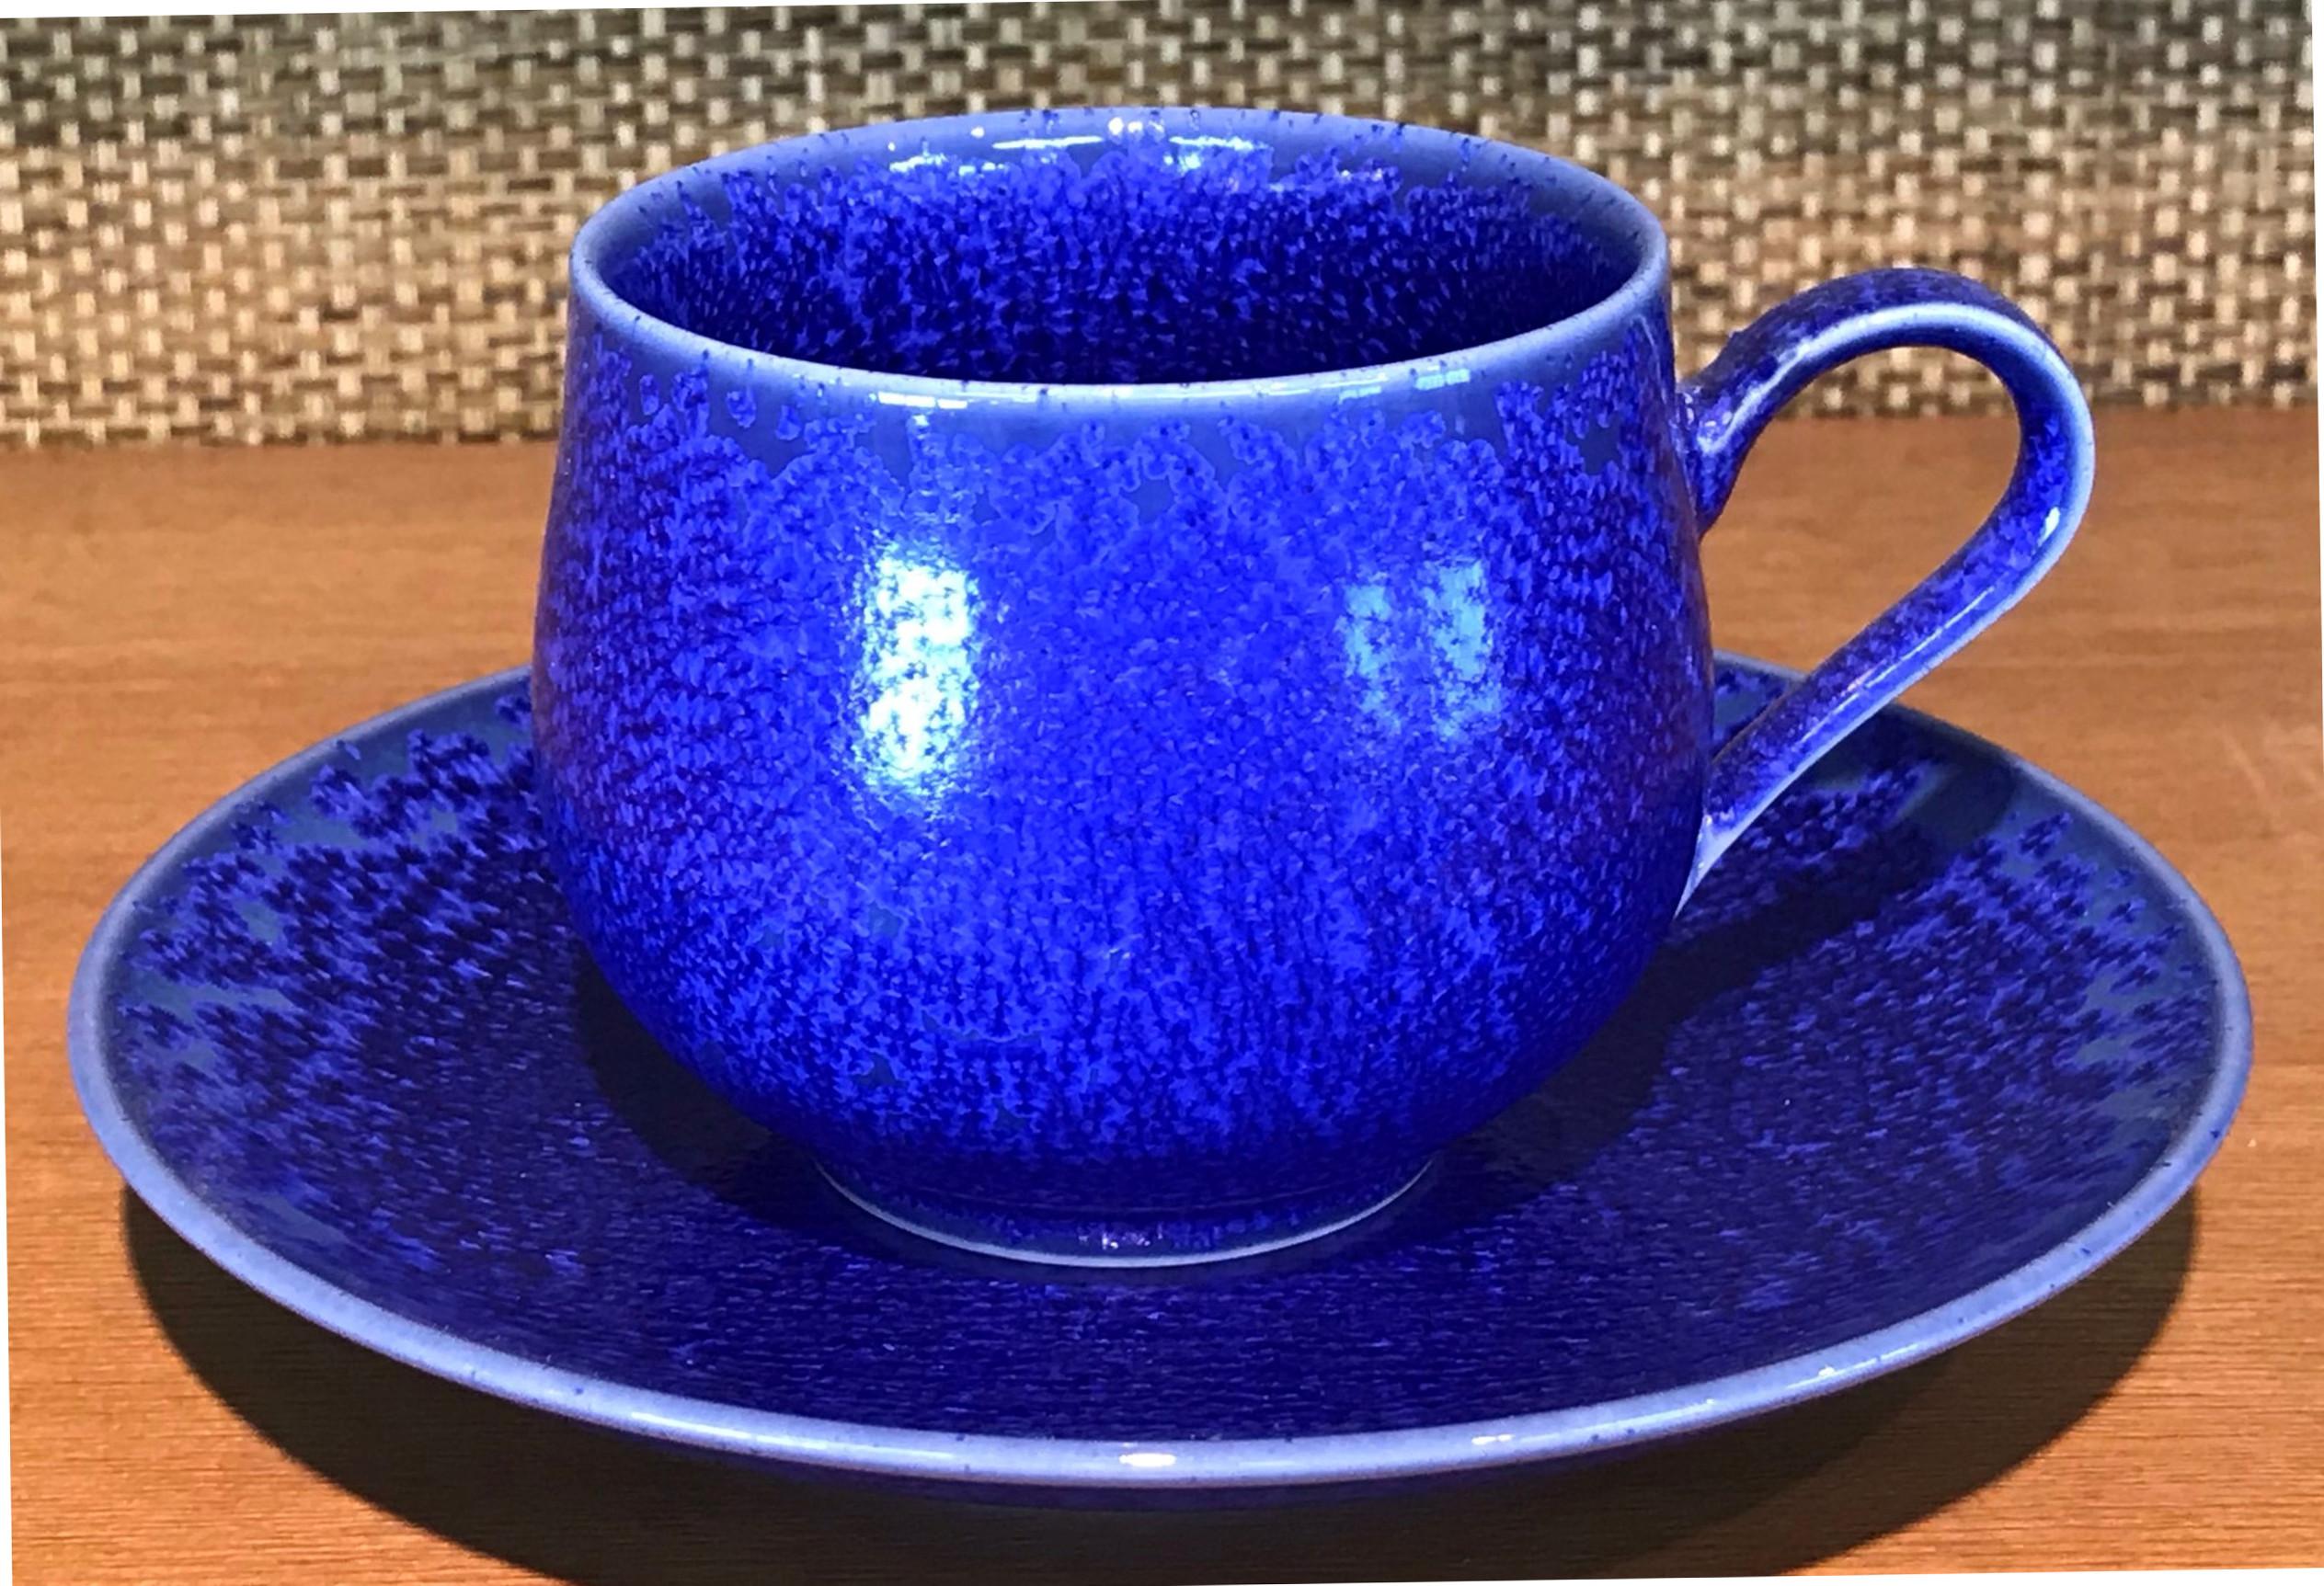 Hand-Glazed Japanese Blue Porcelain Cup and Saucer by Contemporary Master Artist 3